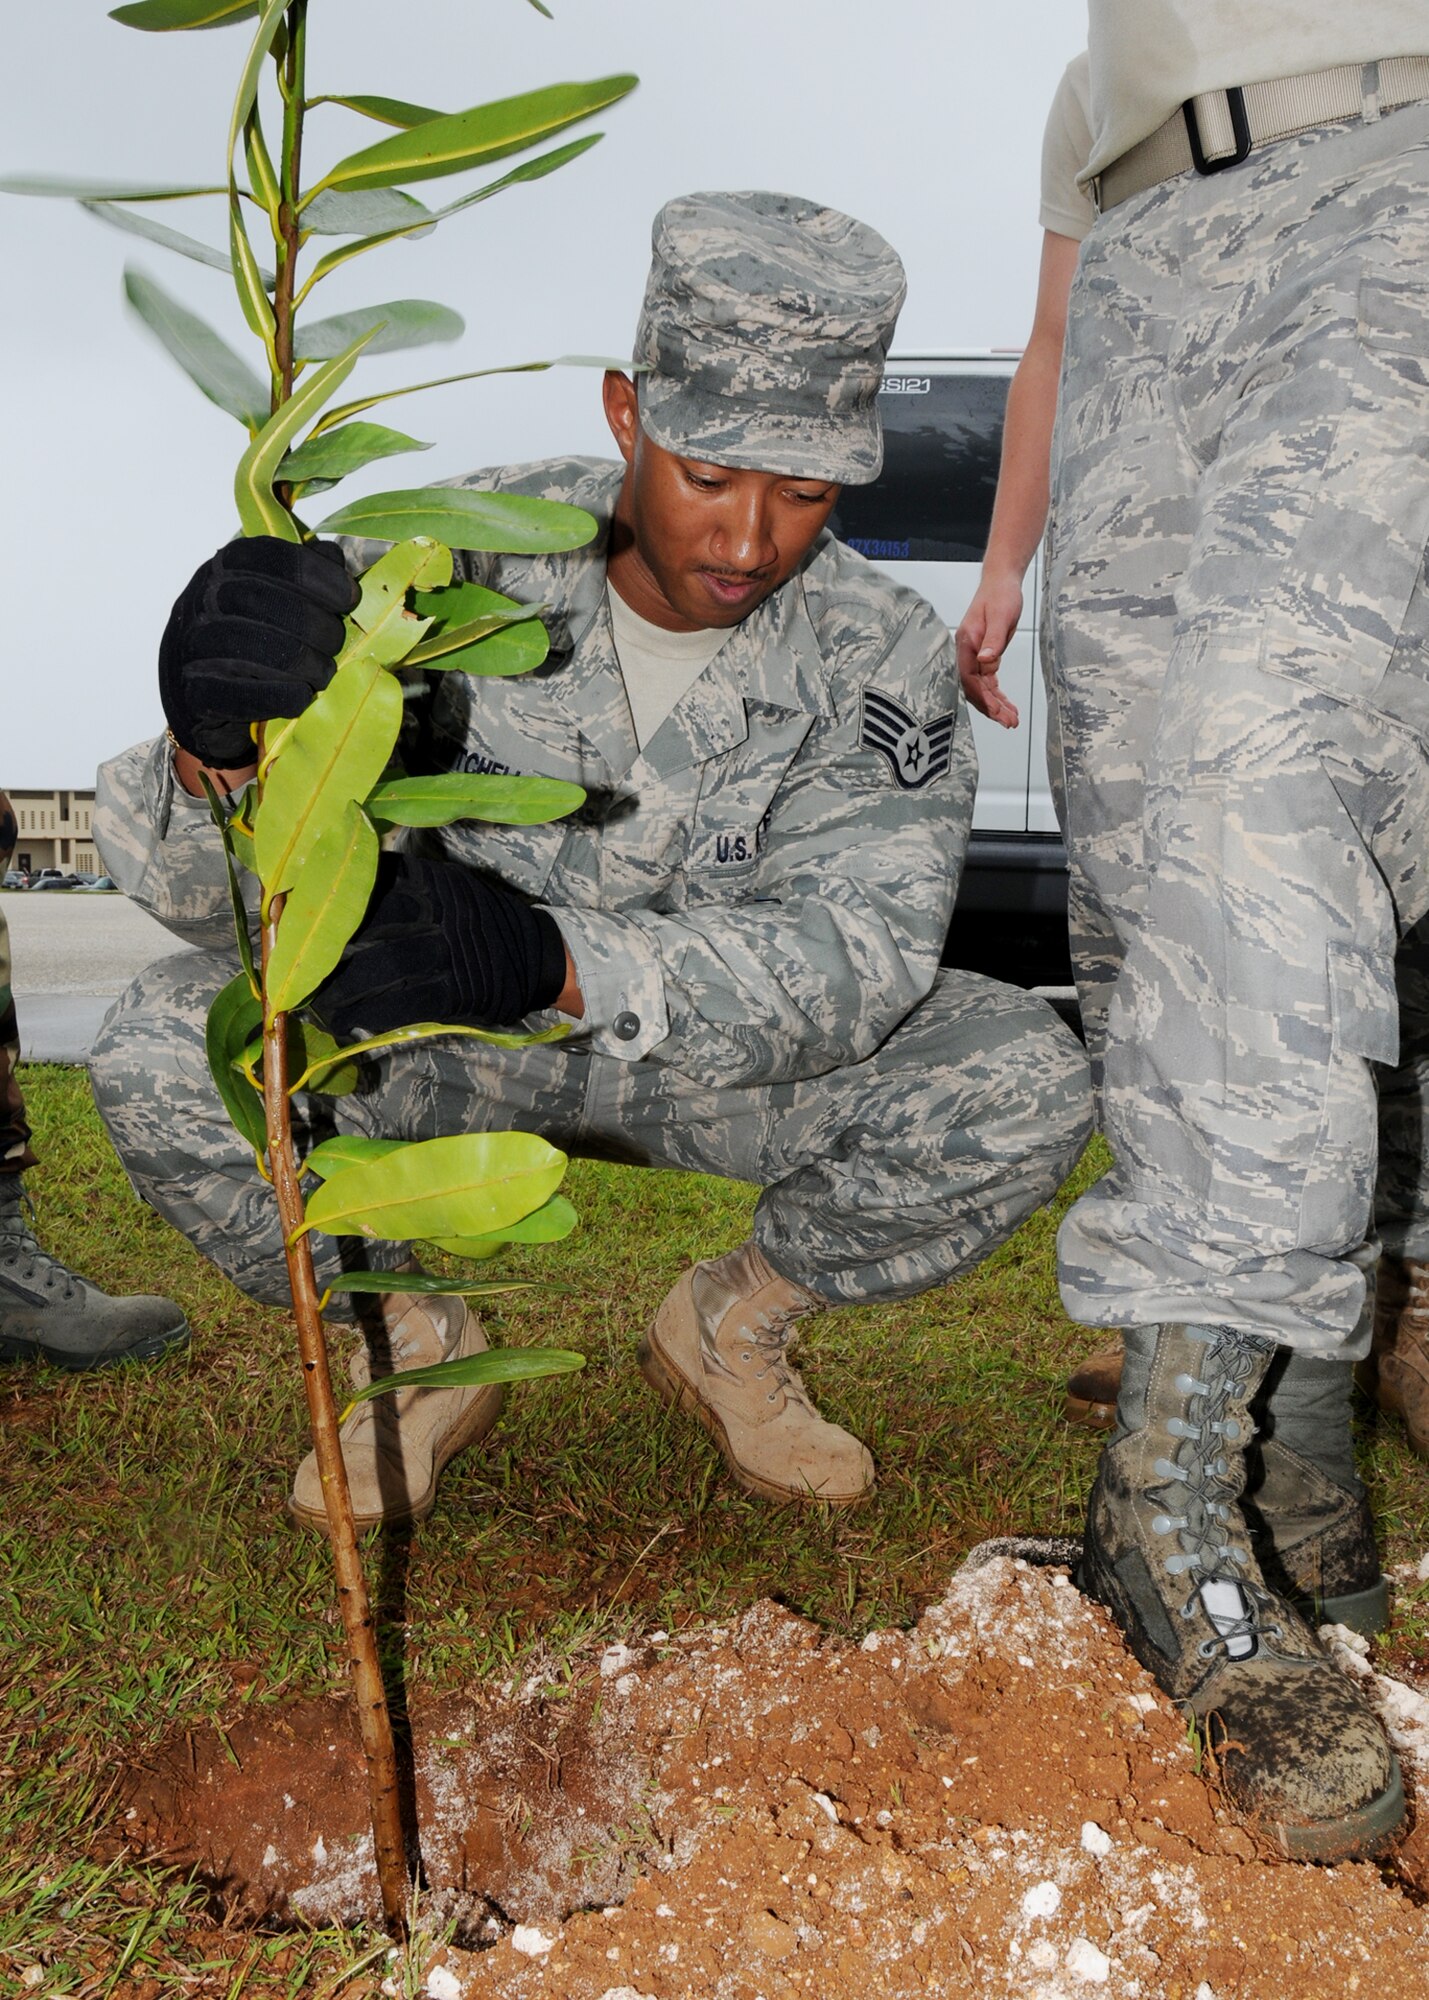 ANDERSEN AIR FORCE BASE, Guam -Staff Sgt. Curt Mitchell plants a tree donated by the 36th Civil Engineer Squadron at the First Term Airmen's Center here Dec. 11. Sergeant Mitchell and the FTAC Airmen planted two trees in efforts to help beautify Andersen. (U.S. Air Force photo by Senior Airman Nichelle Griffiths)